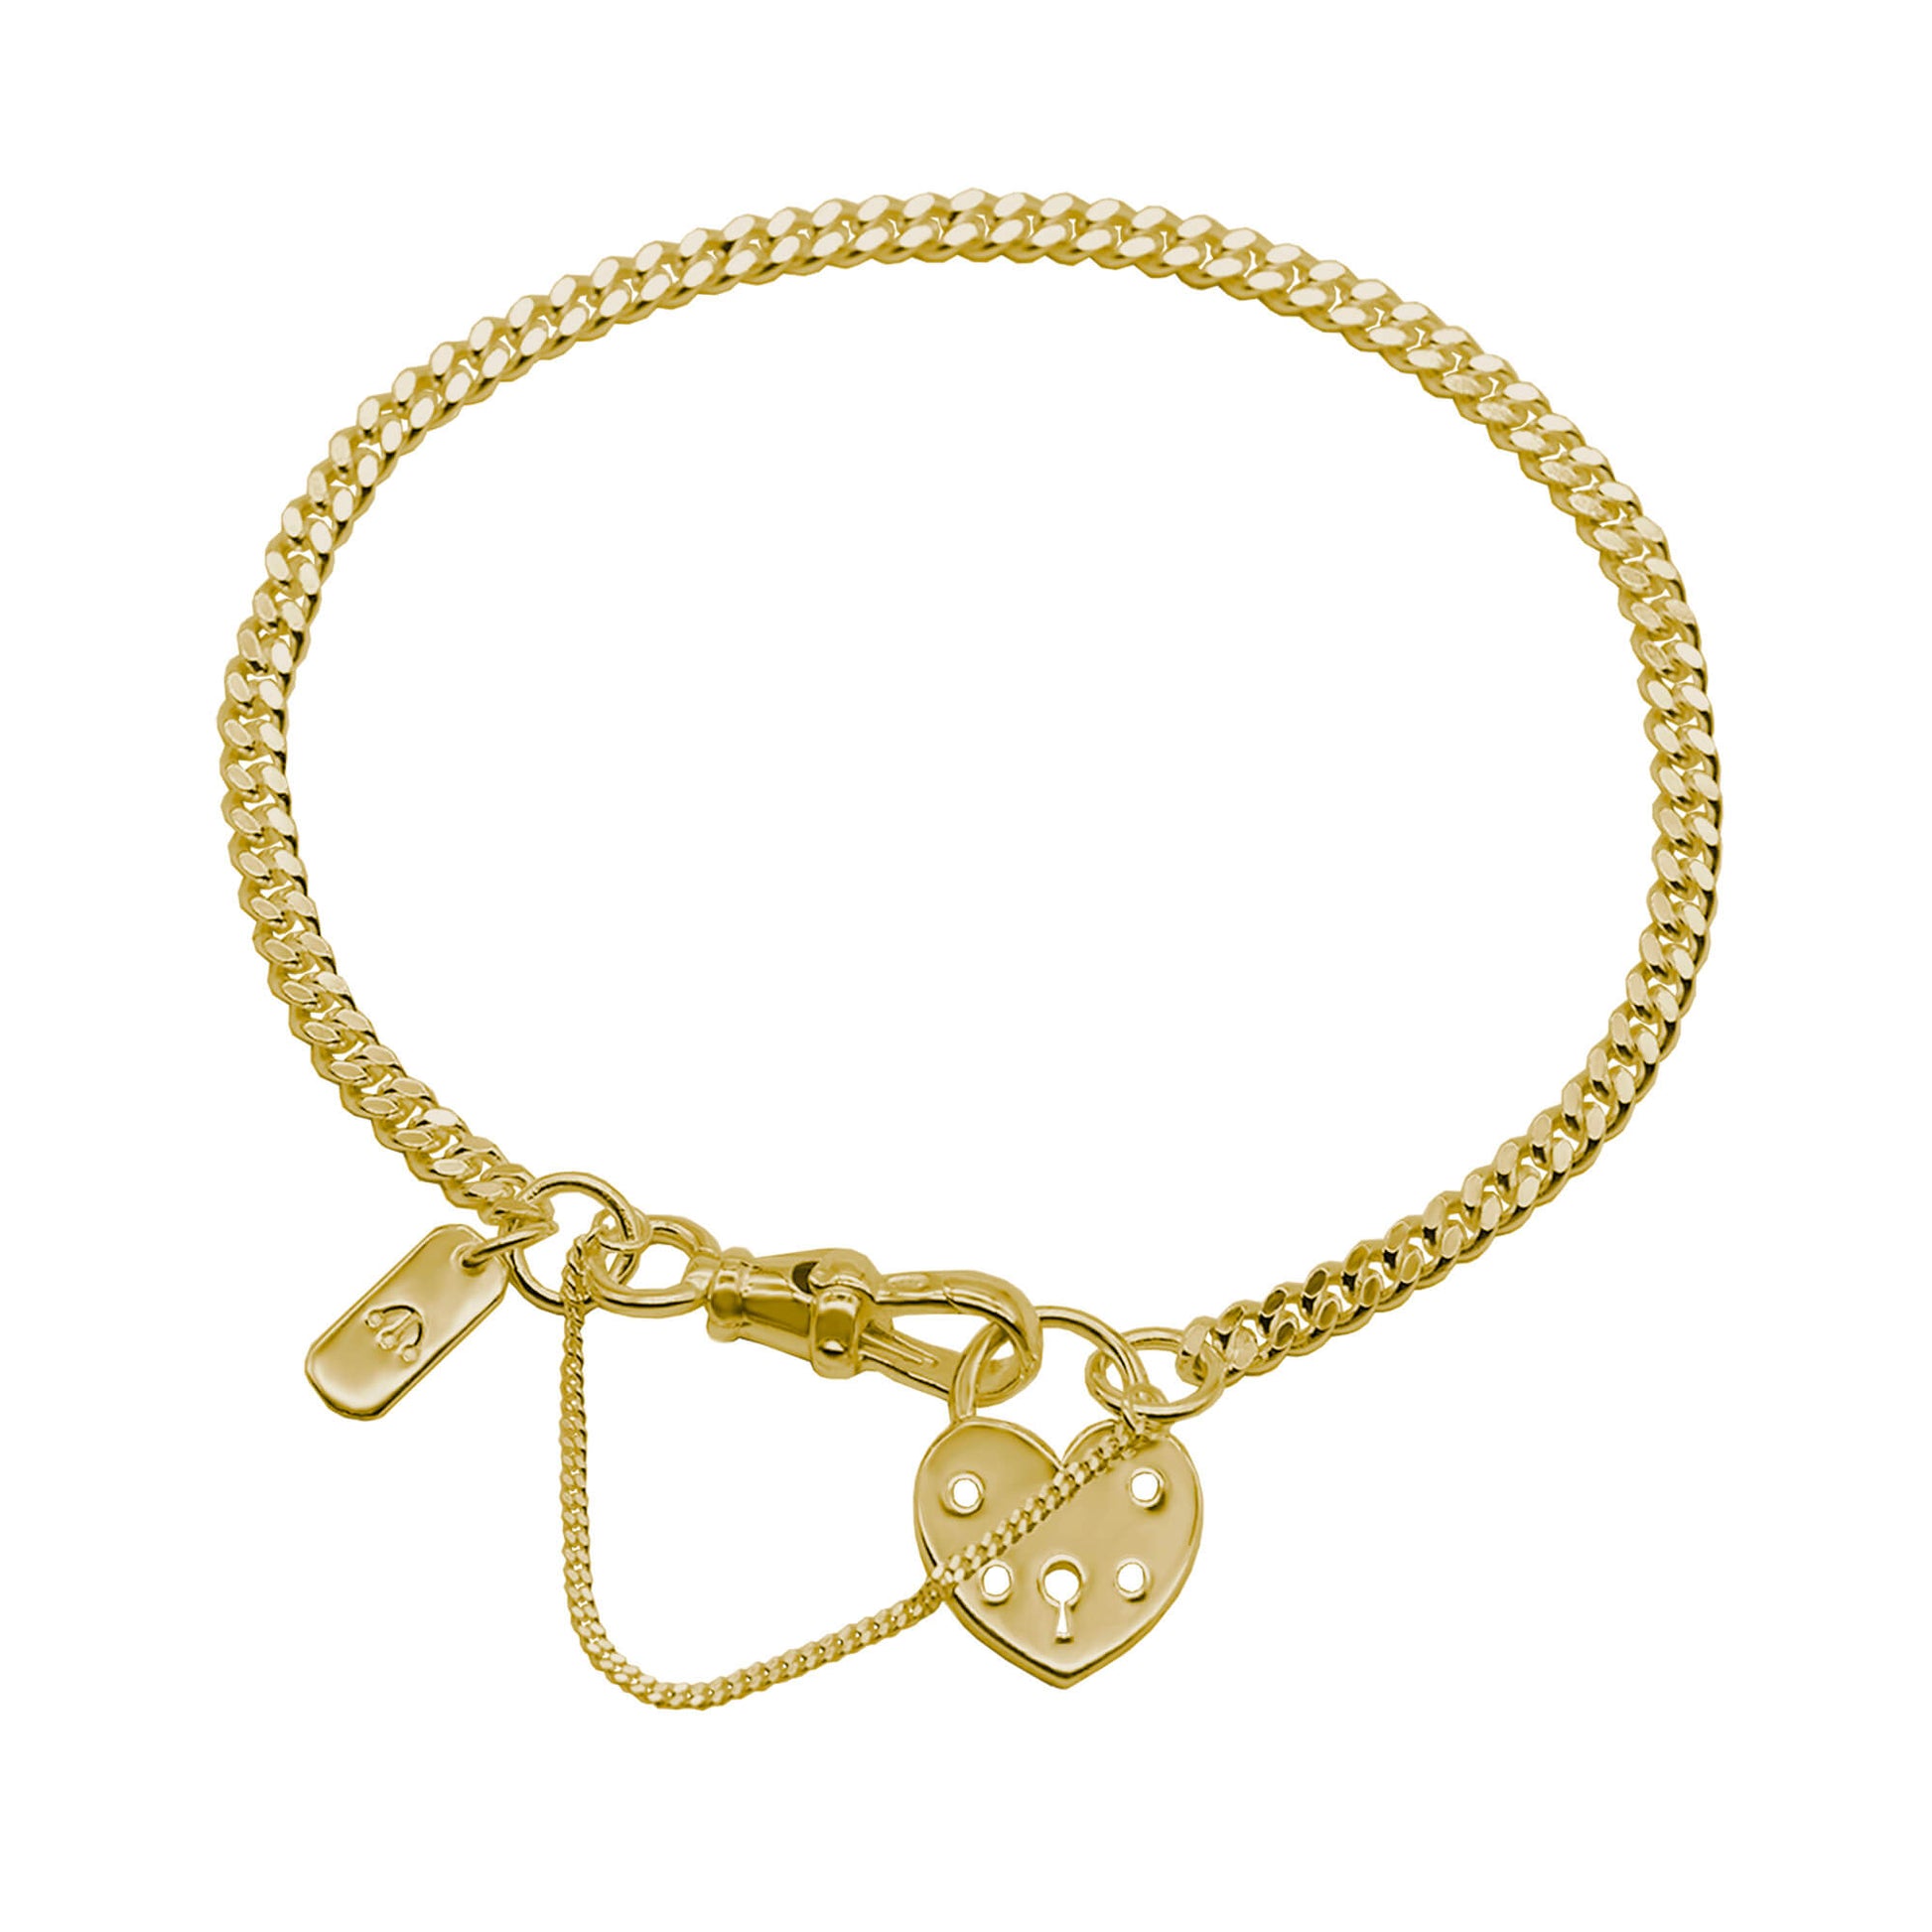 GOLD CURB CHAIN BRACELET WITH HEART PADLOCK CHAIN, FINE TRACE SAFETY CHAIN AND PAWNSHOP LOGO RAG.